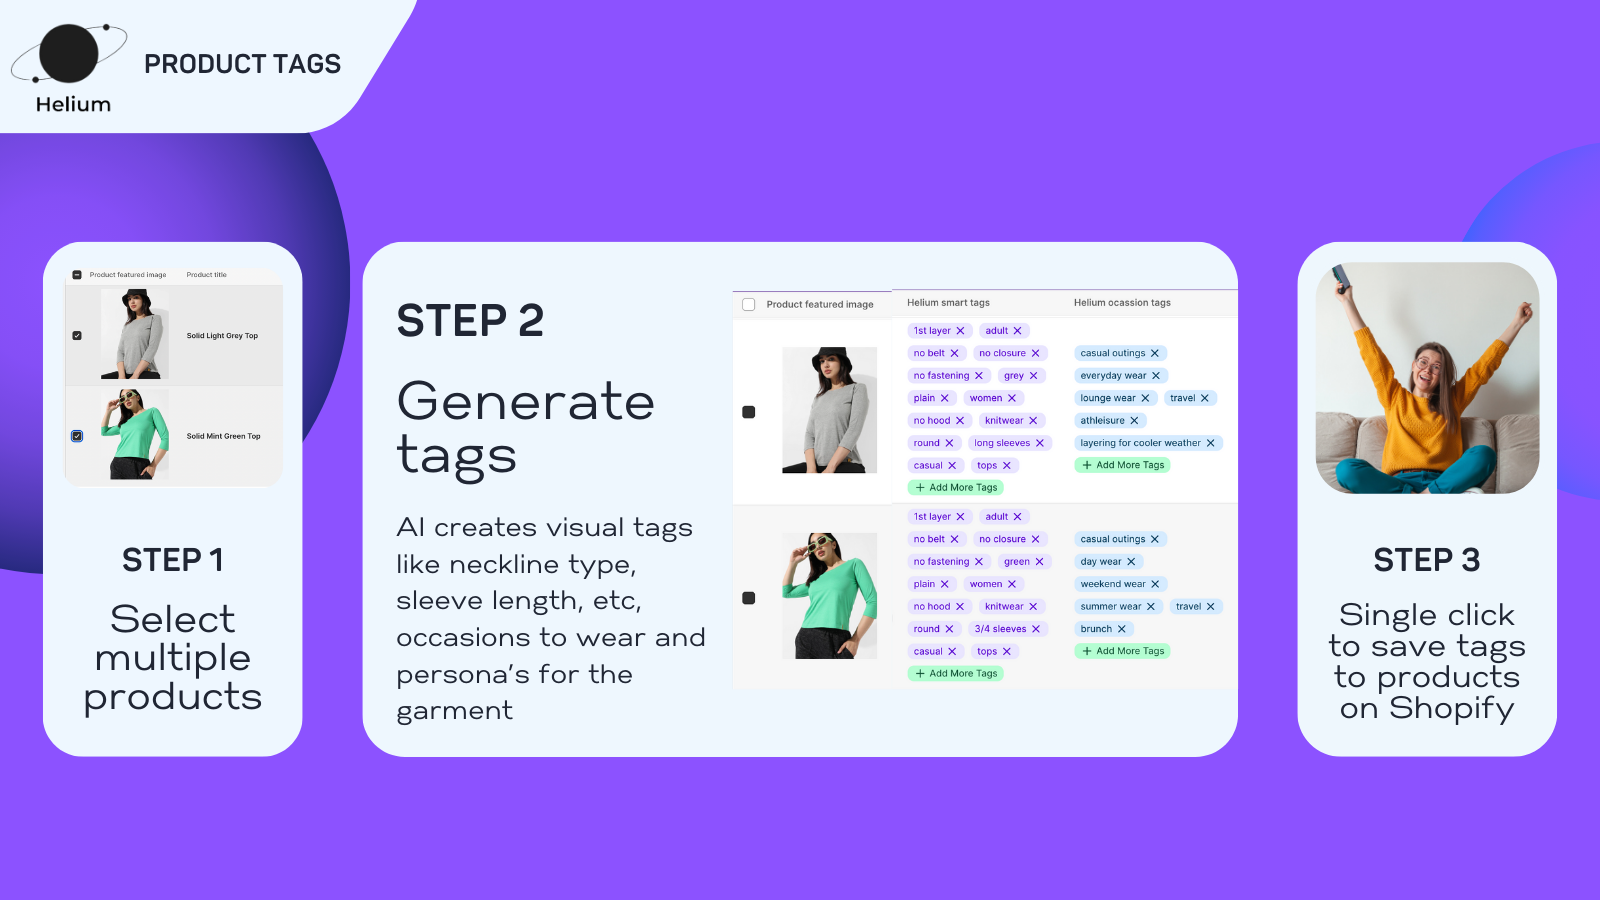 Single click to generate tags for all your products